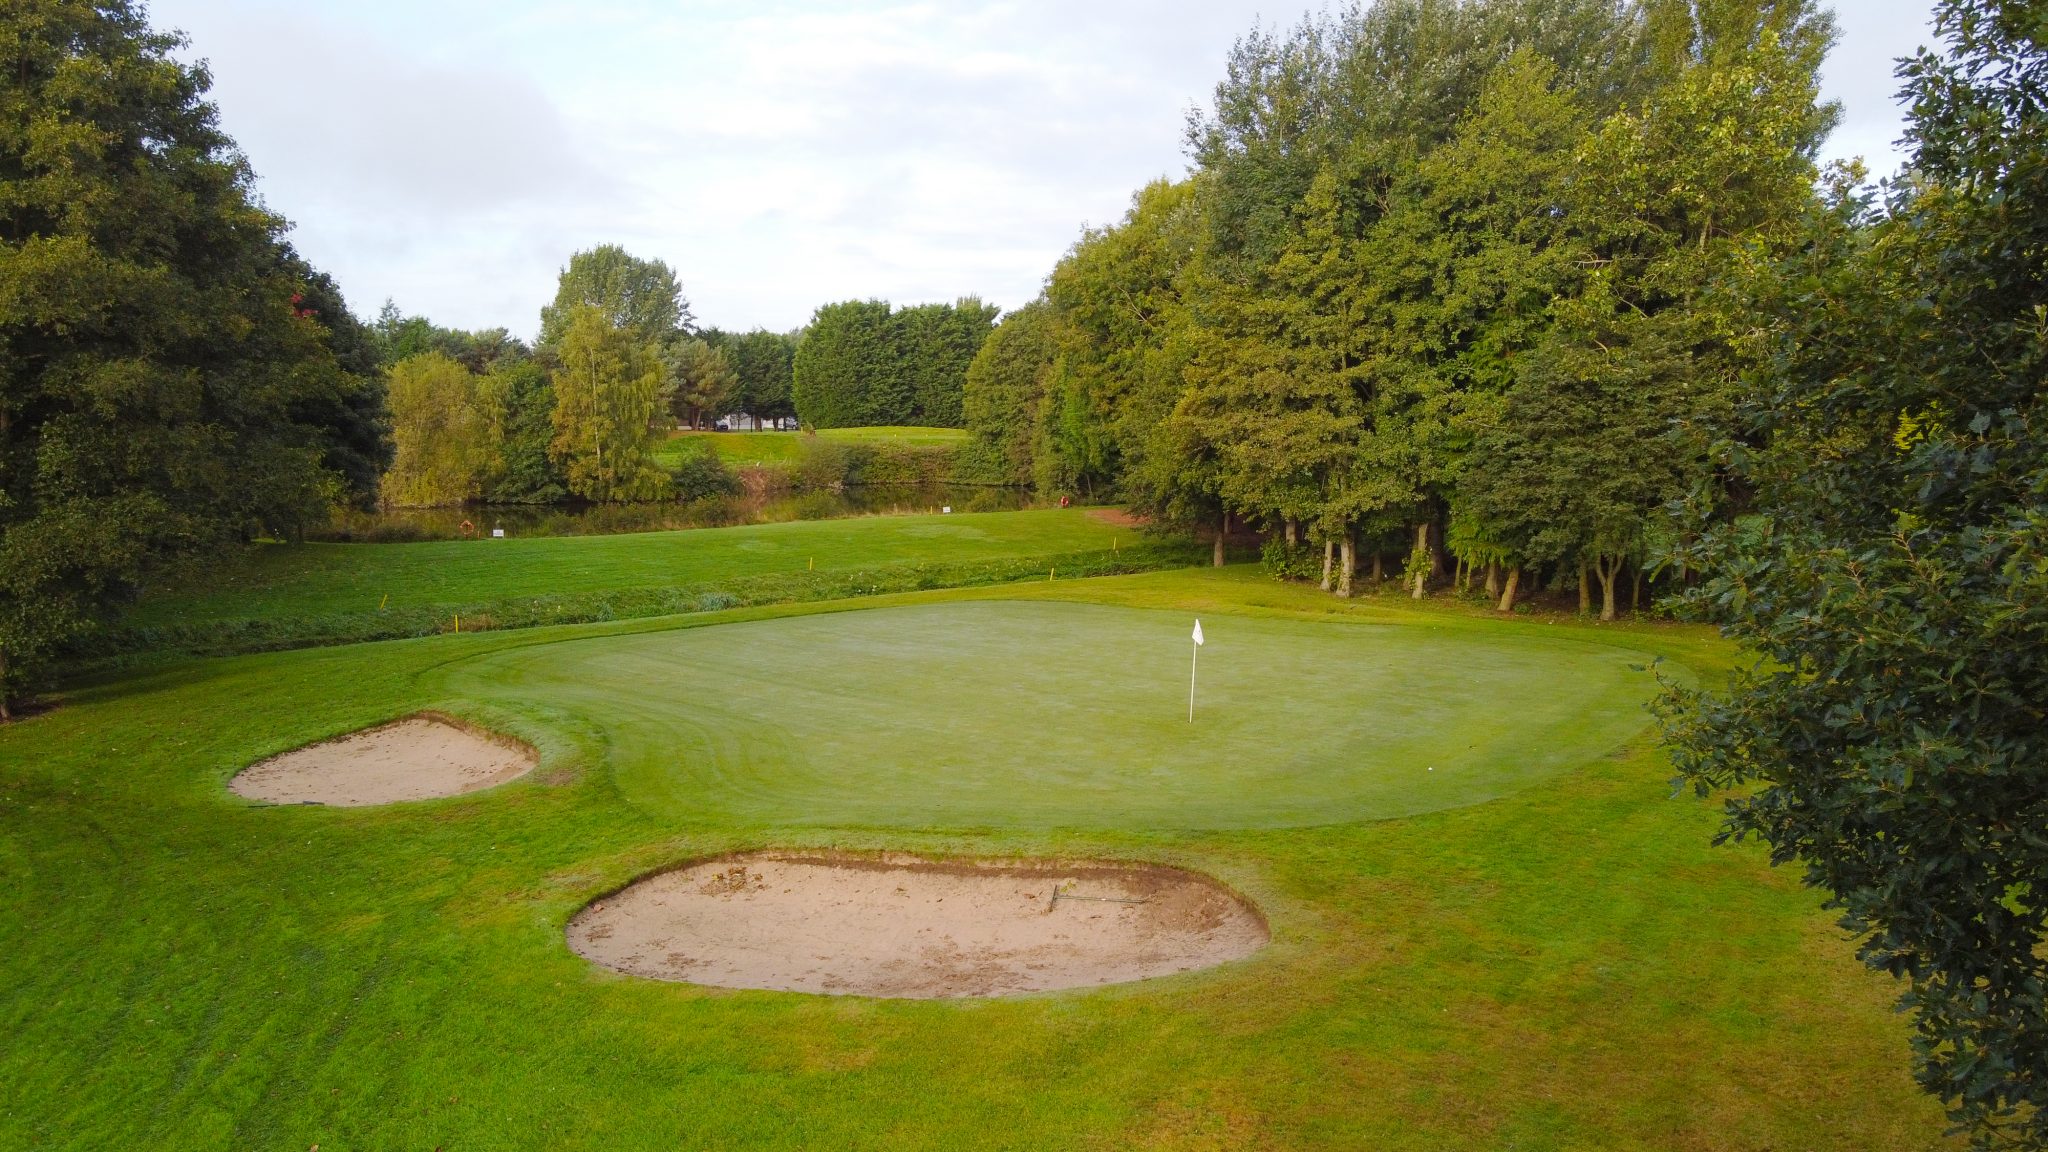 Green golf course with bunkers at Allerthorpe